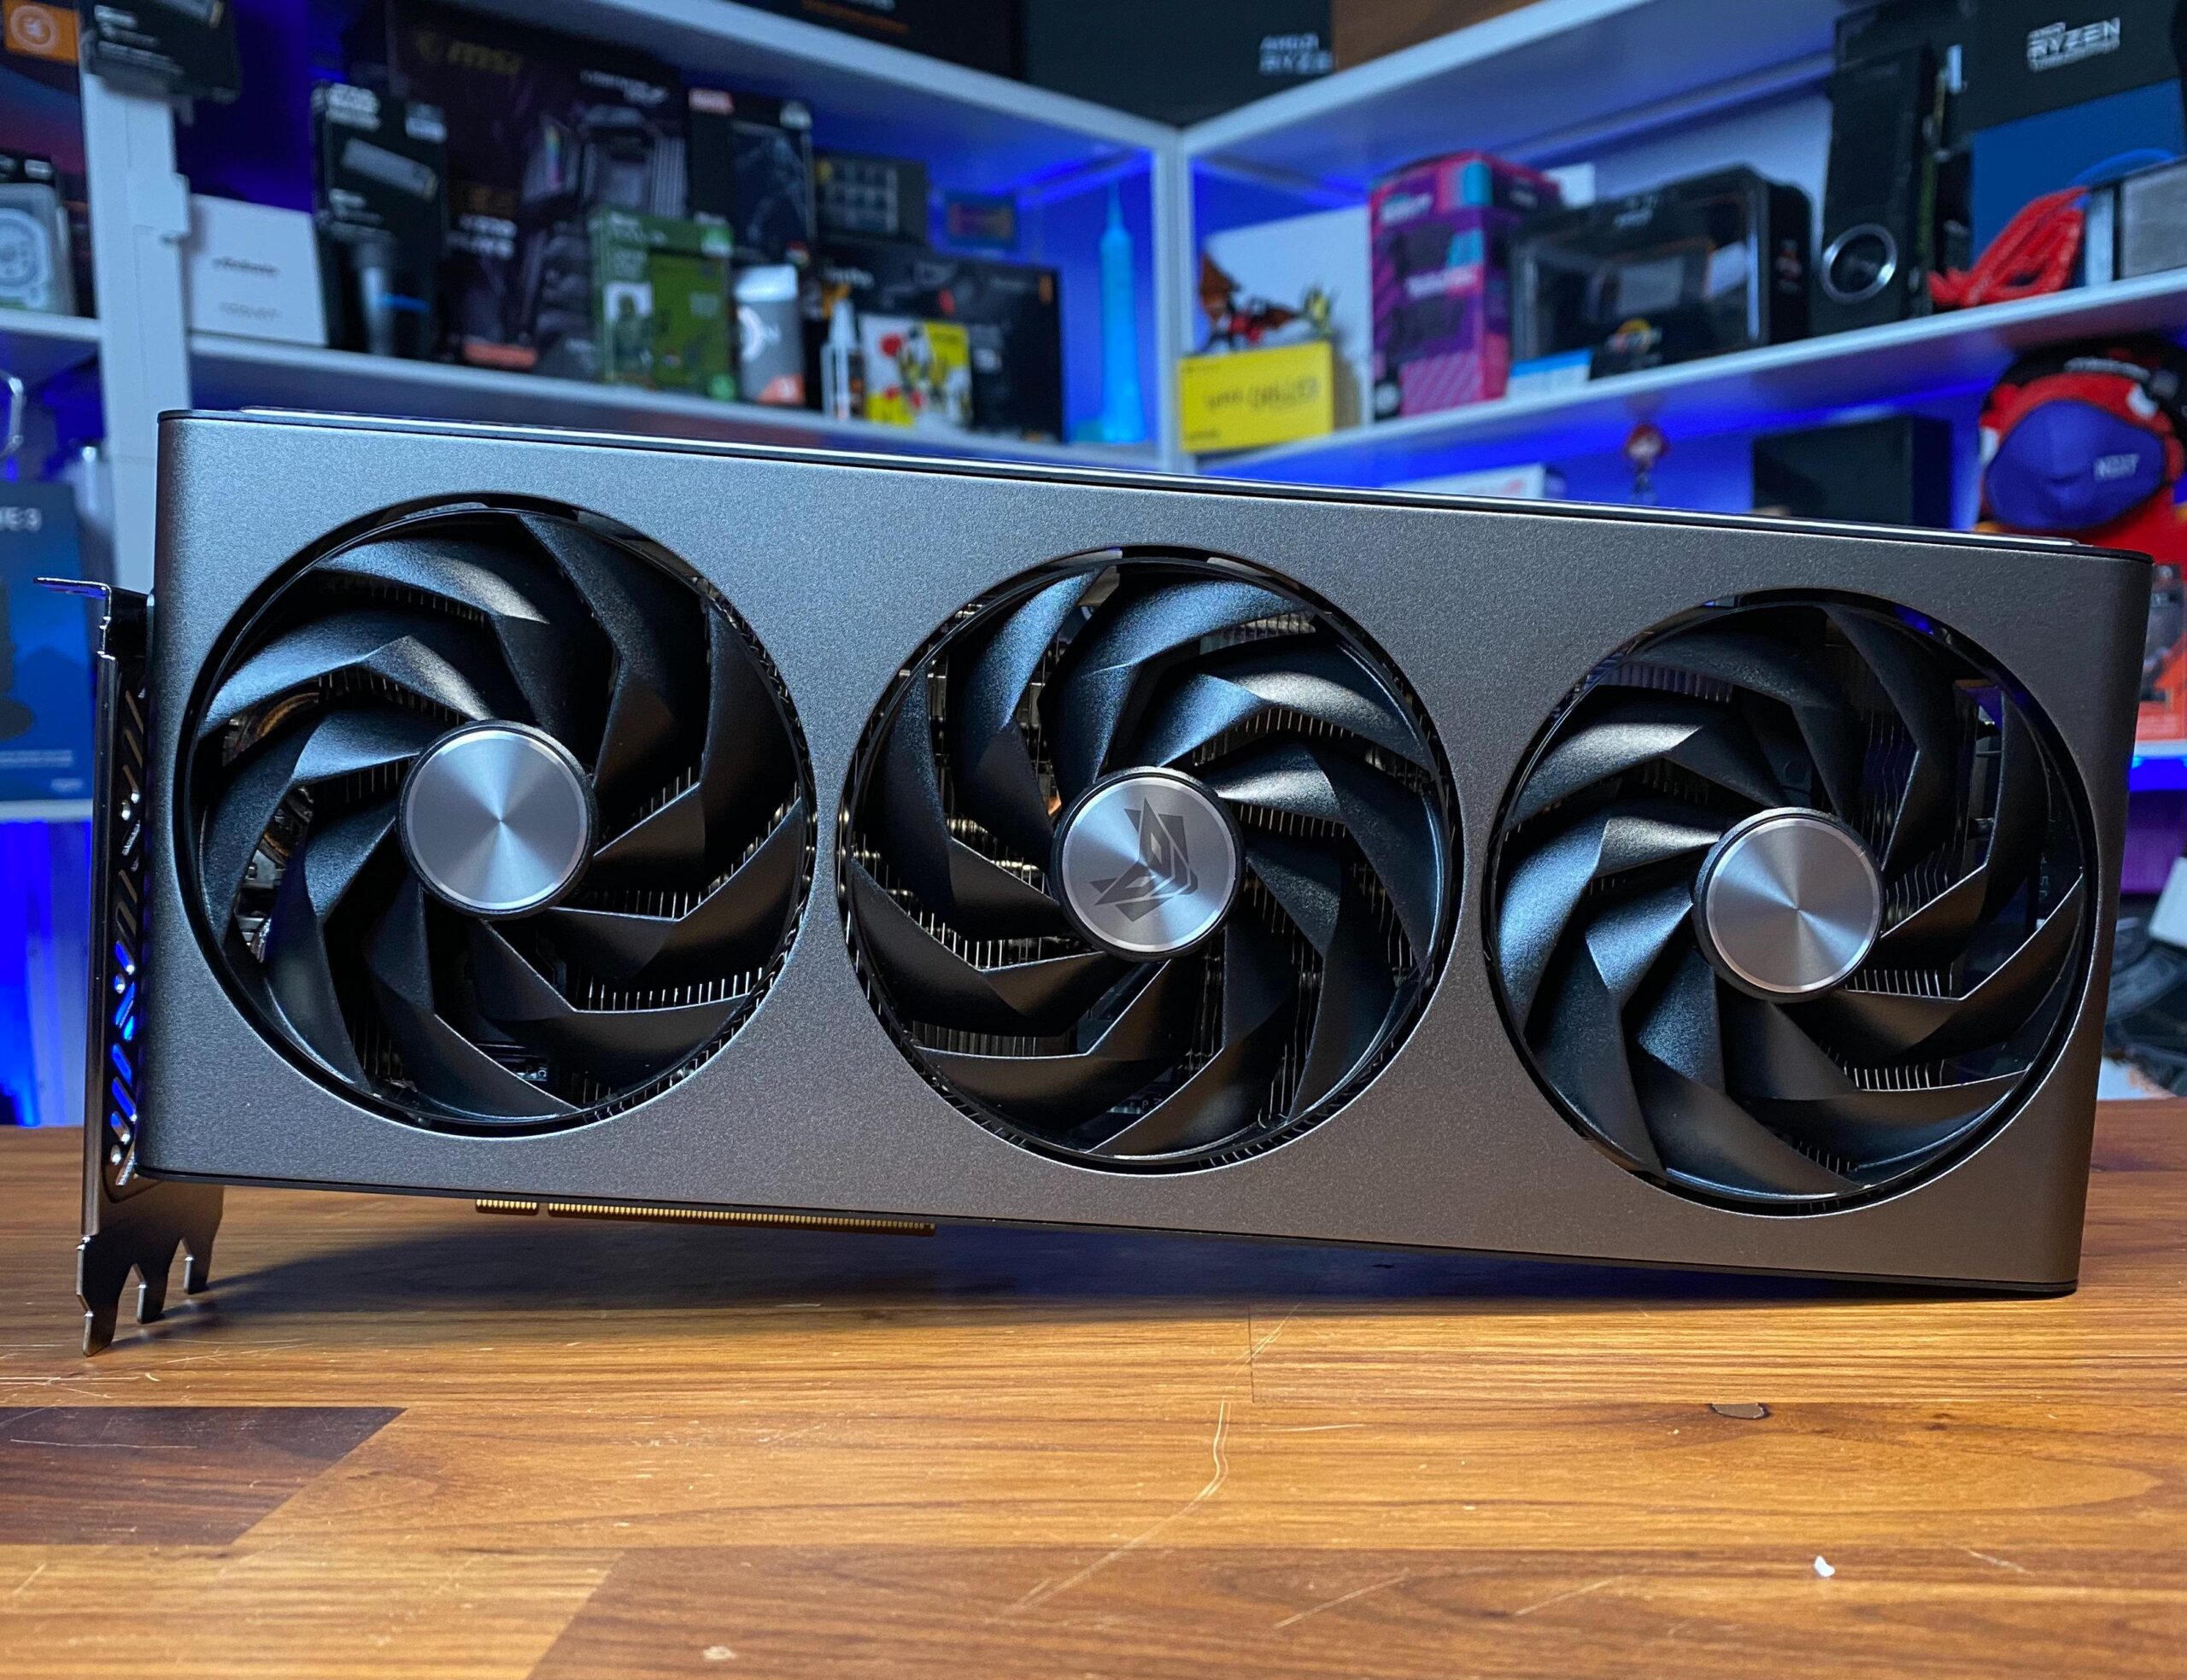 Reviews Of The Radeon RX 7800 XT Have Been Published